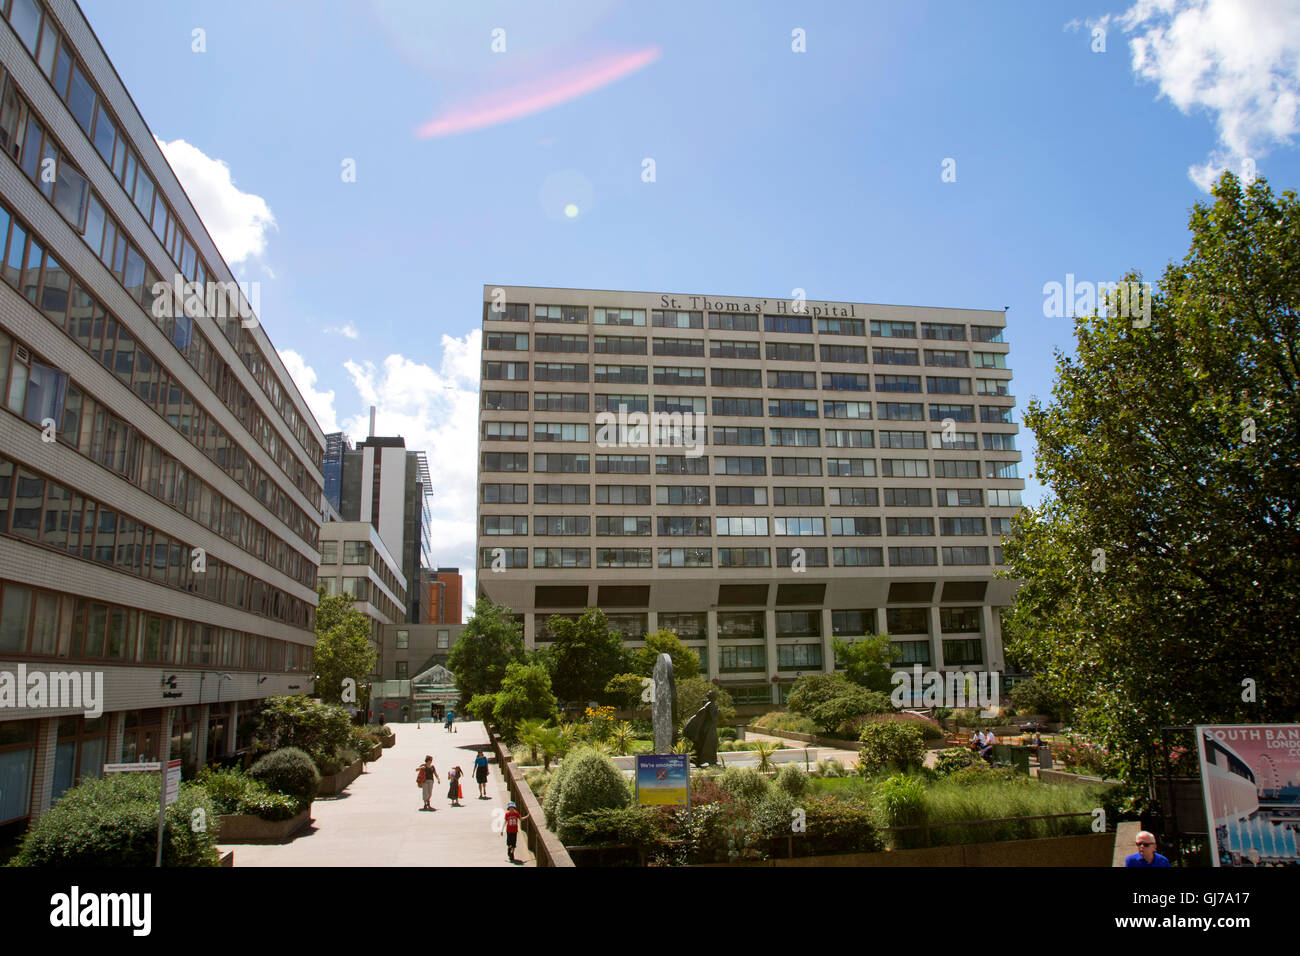 St Thomas' Hospital in London, England in summer during sunny blue sky Stock Photo